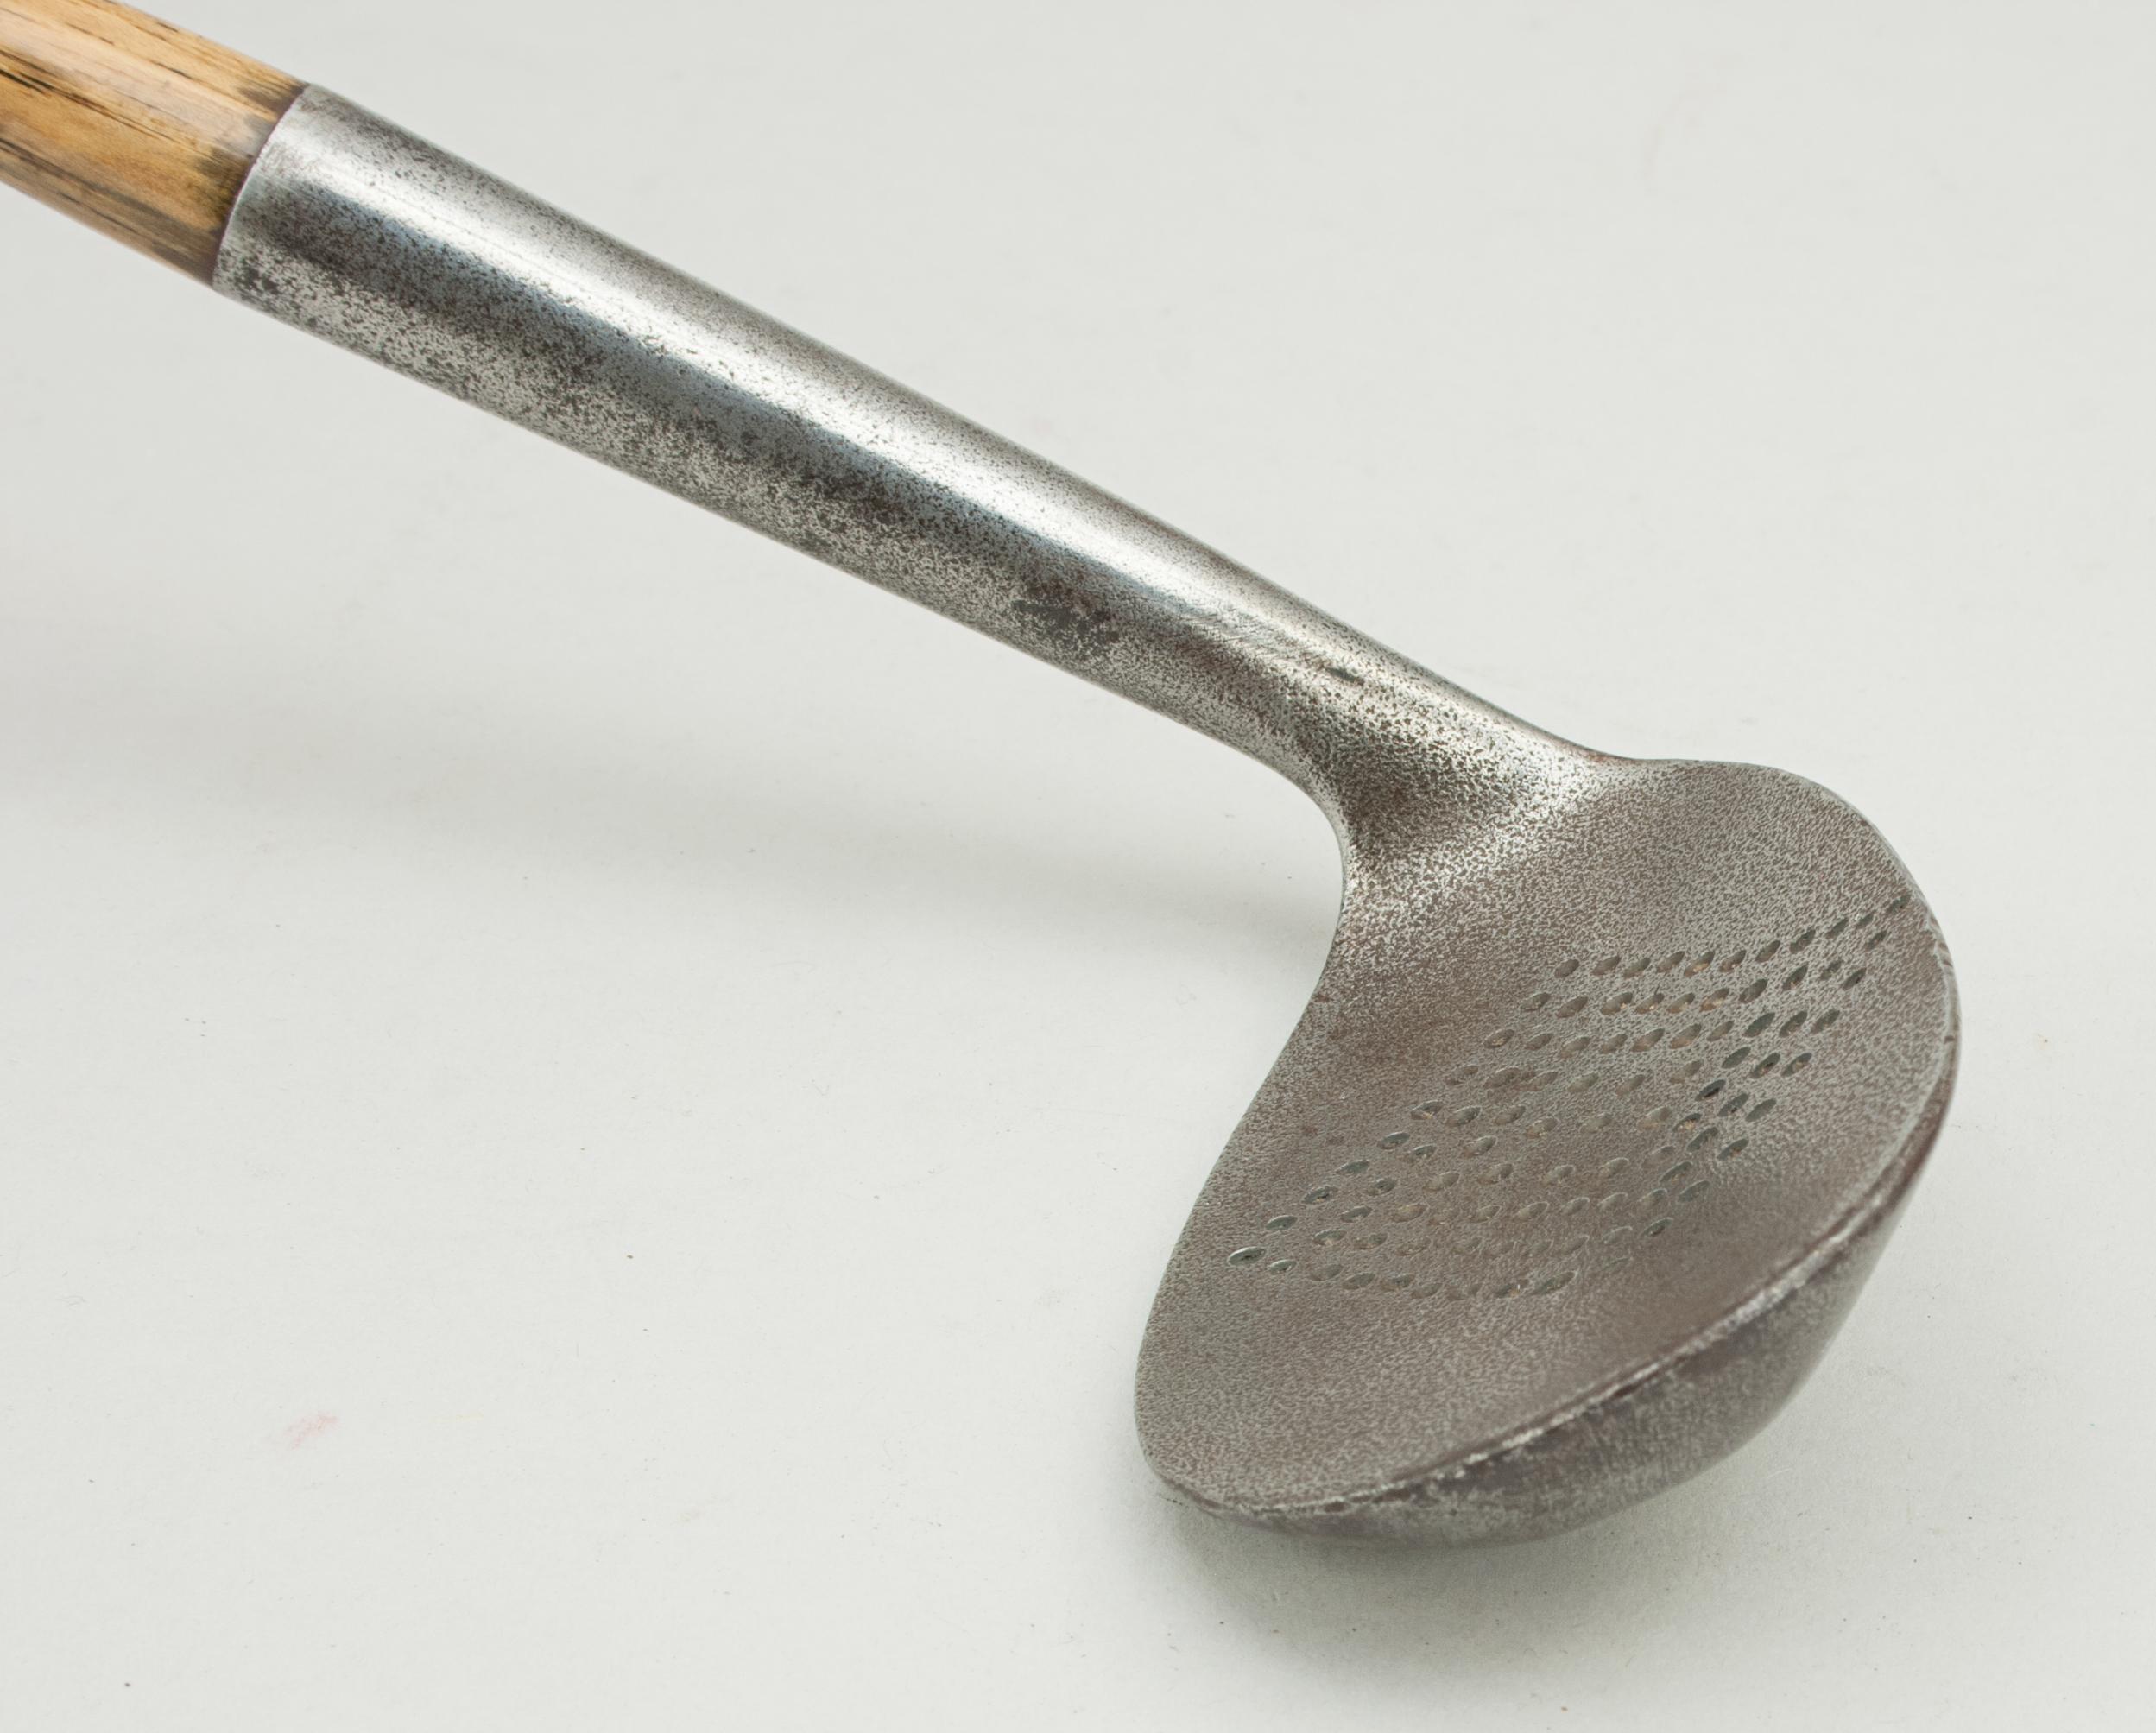 Hickory Shafted Niblick, Golf Club 2